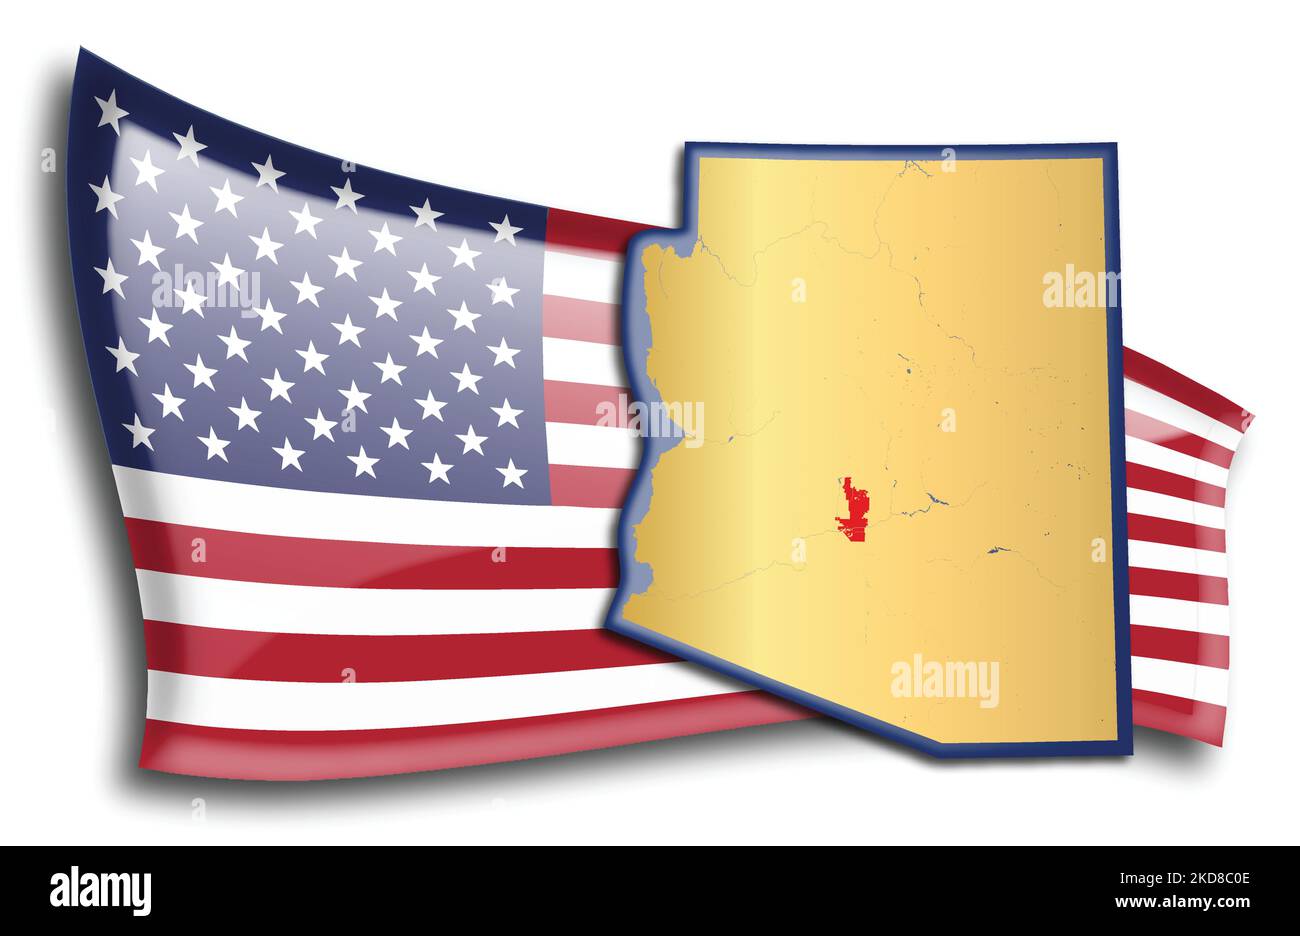 U.S. states - map of Arizona against an American flag. Rivers and lakes are shown on the map. American Flag and State Map can be used separately and e Stock Vector